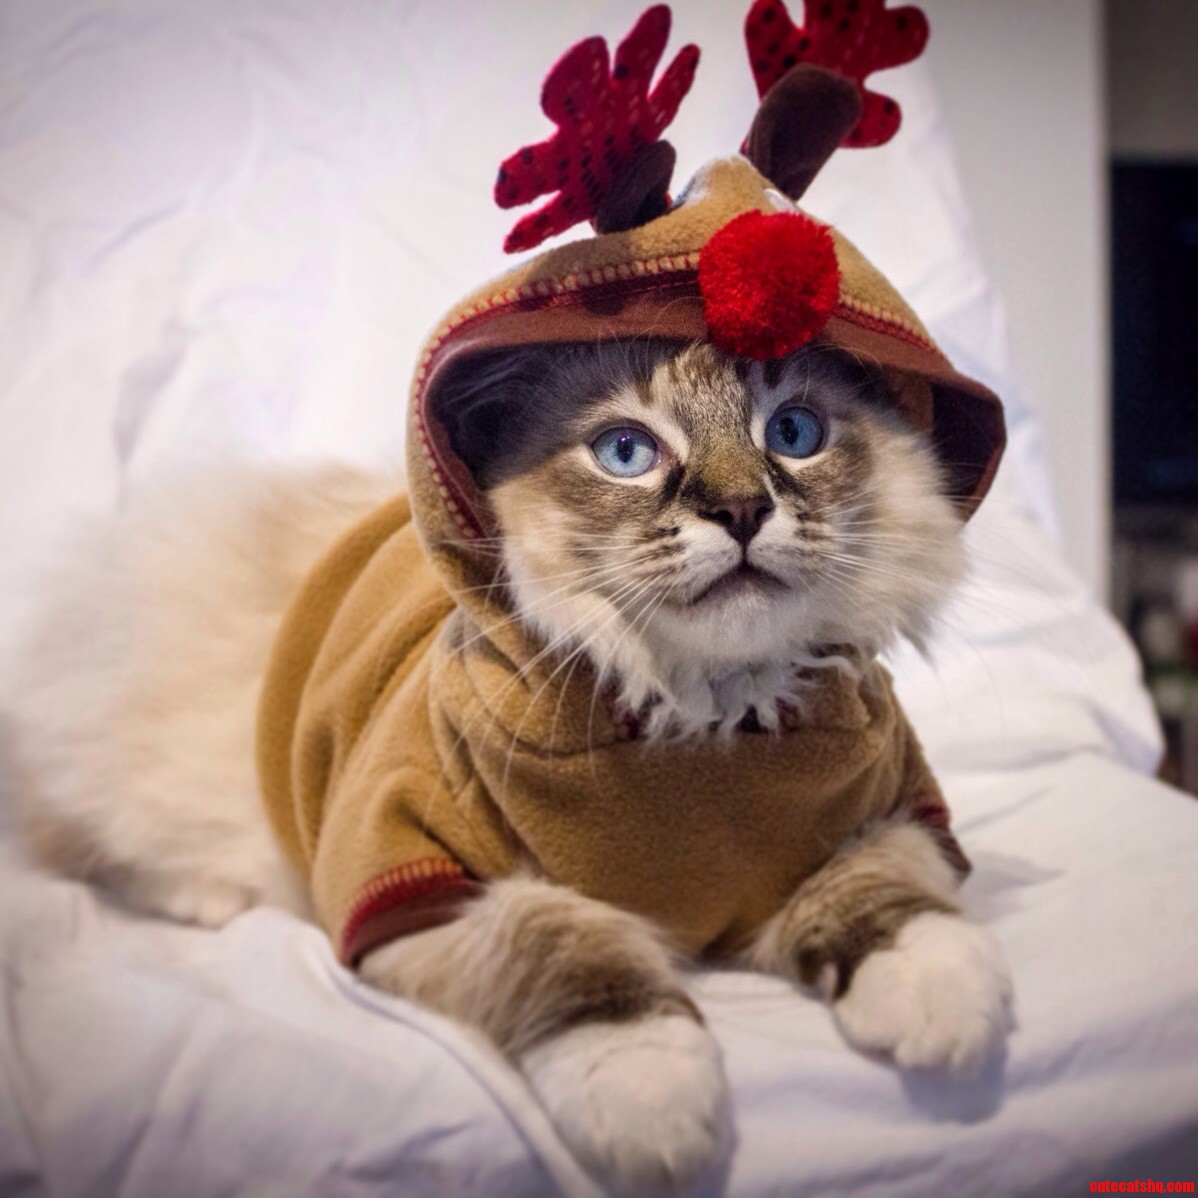 Oliver Enjoys Dressing Up And Posing A Little Too Much…